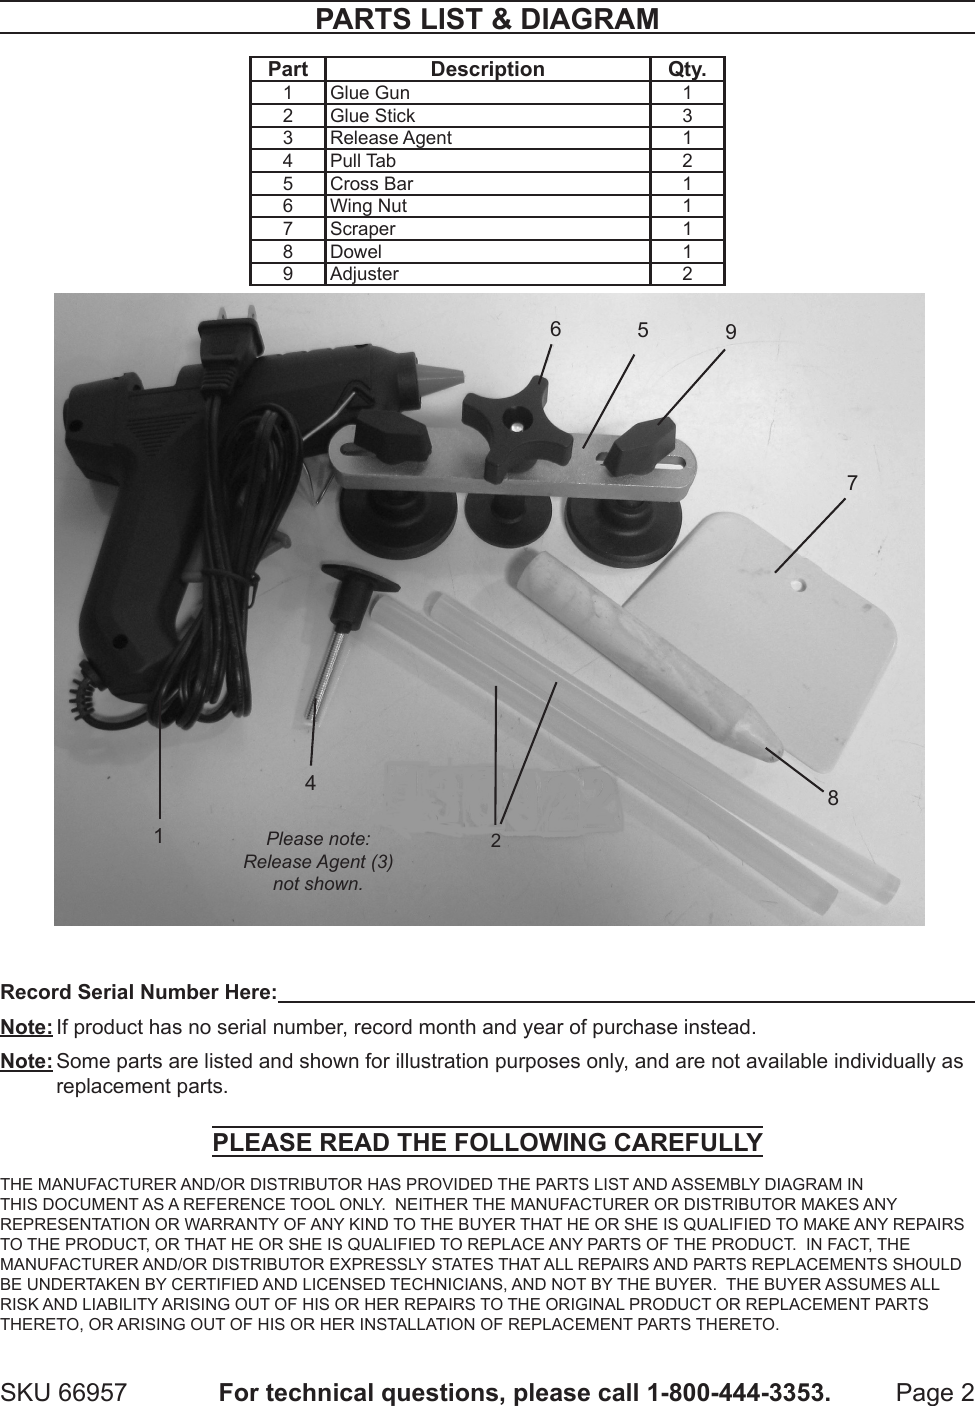 Page 2 of 2 - Harbor-Freight Harbor-Freight-Crossbar-Dent-Repair-Kit-Product-Manual-  Harbor-freight-crossbar-dent-repair-kit-product-manual